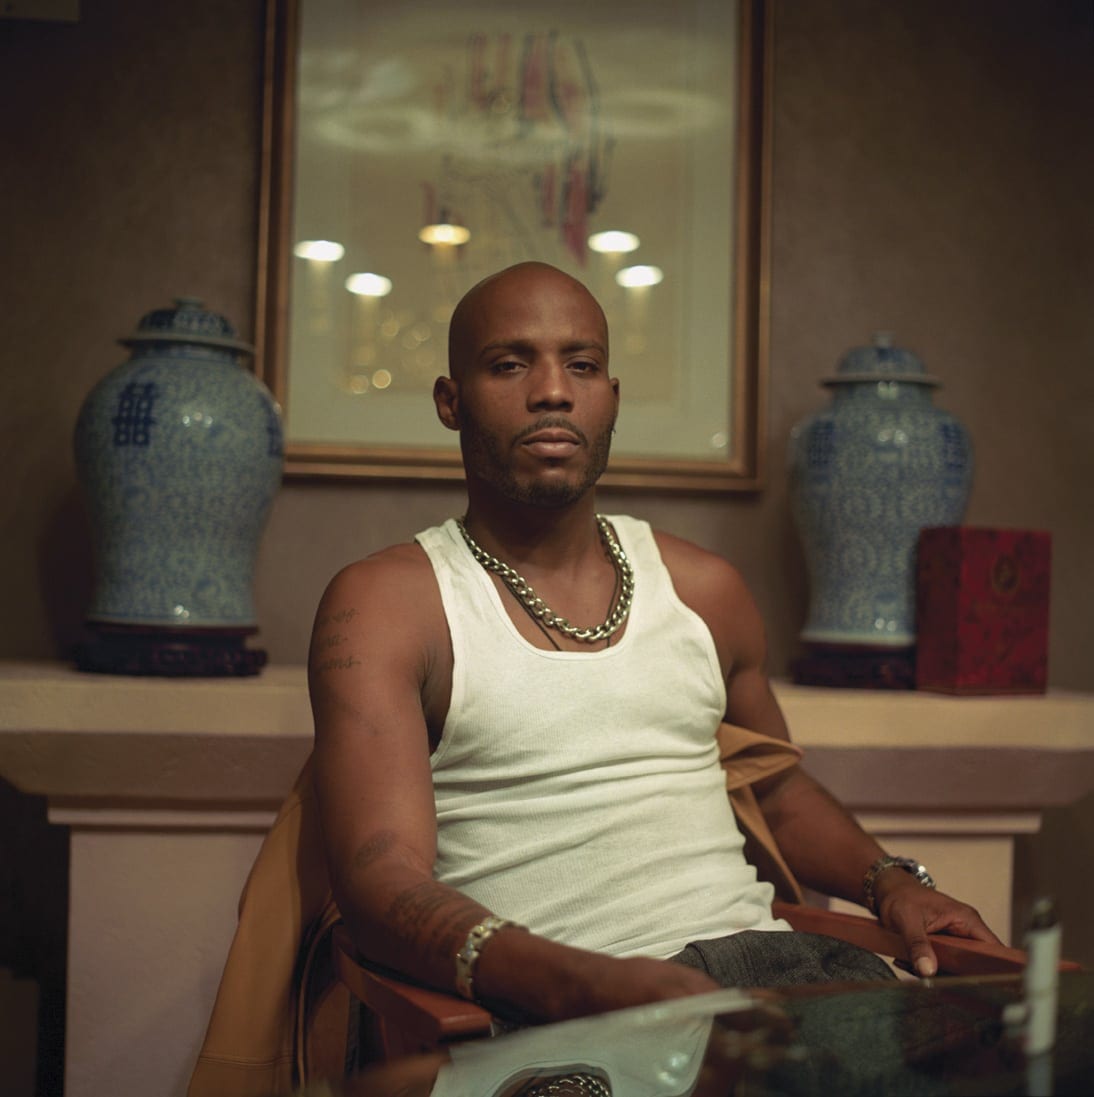 DMX Pleads Guilty To Tax Evasion He Faces 5 Years In Prison